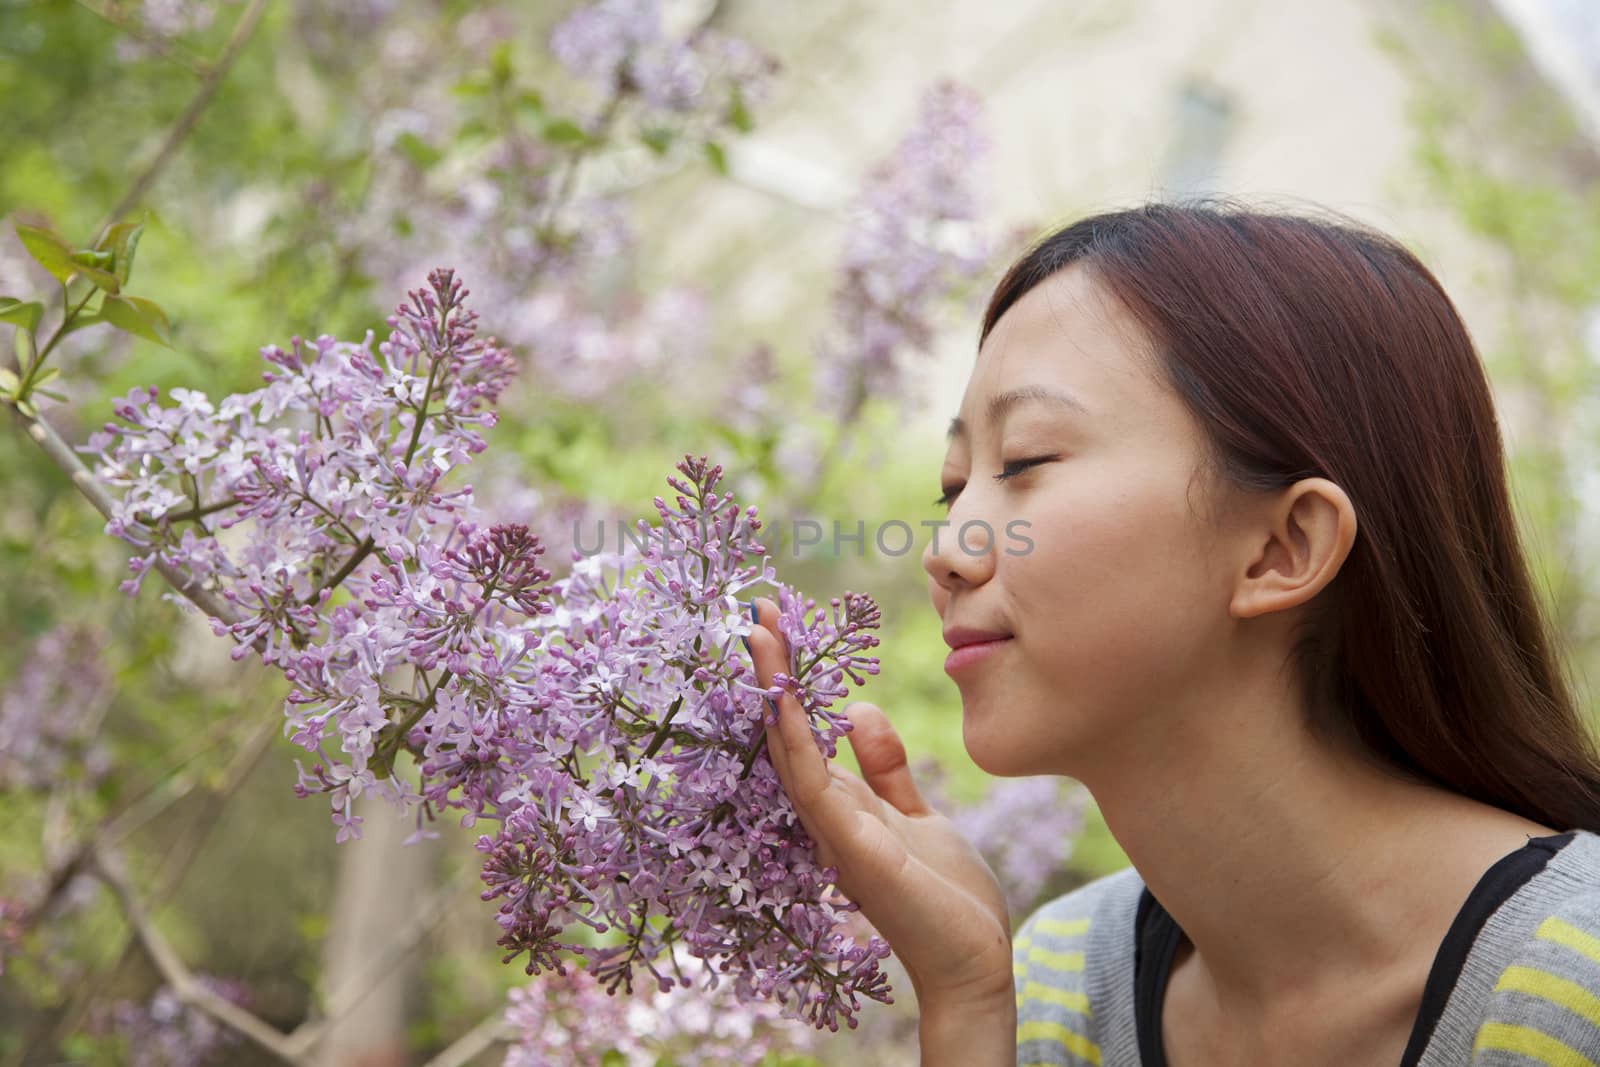 Young woman with eyes closed smelling a flower blossom in the park in springtime